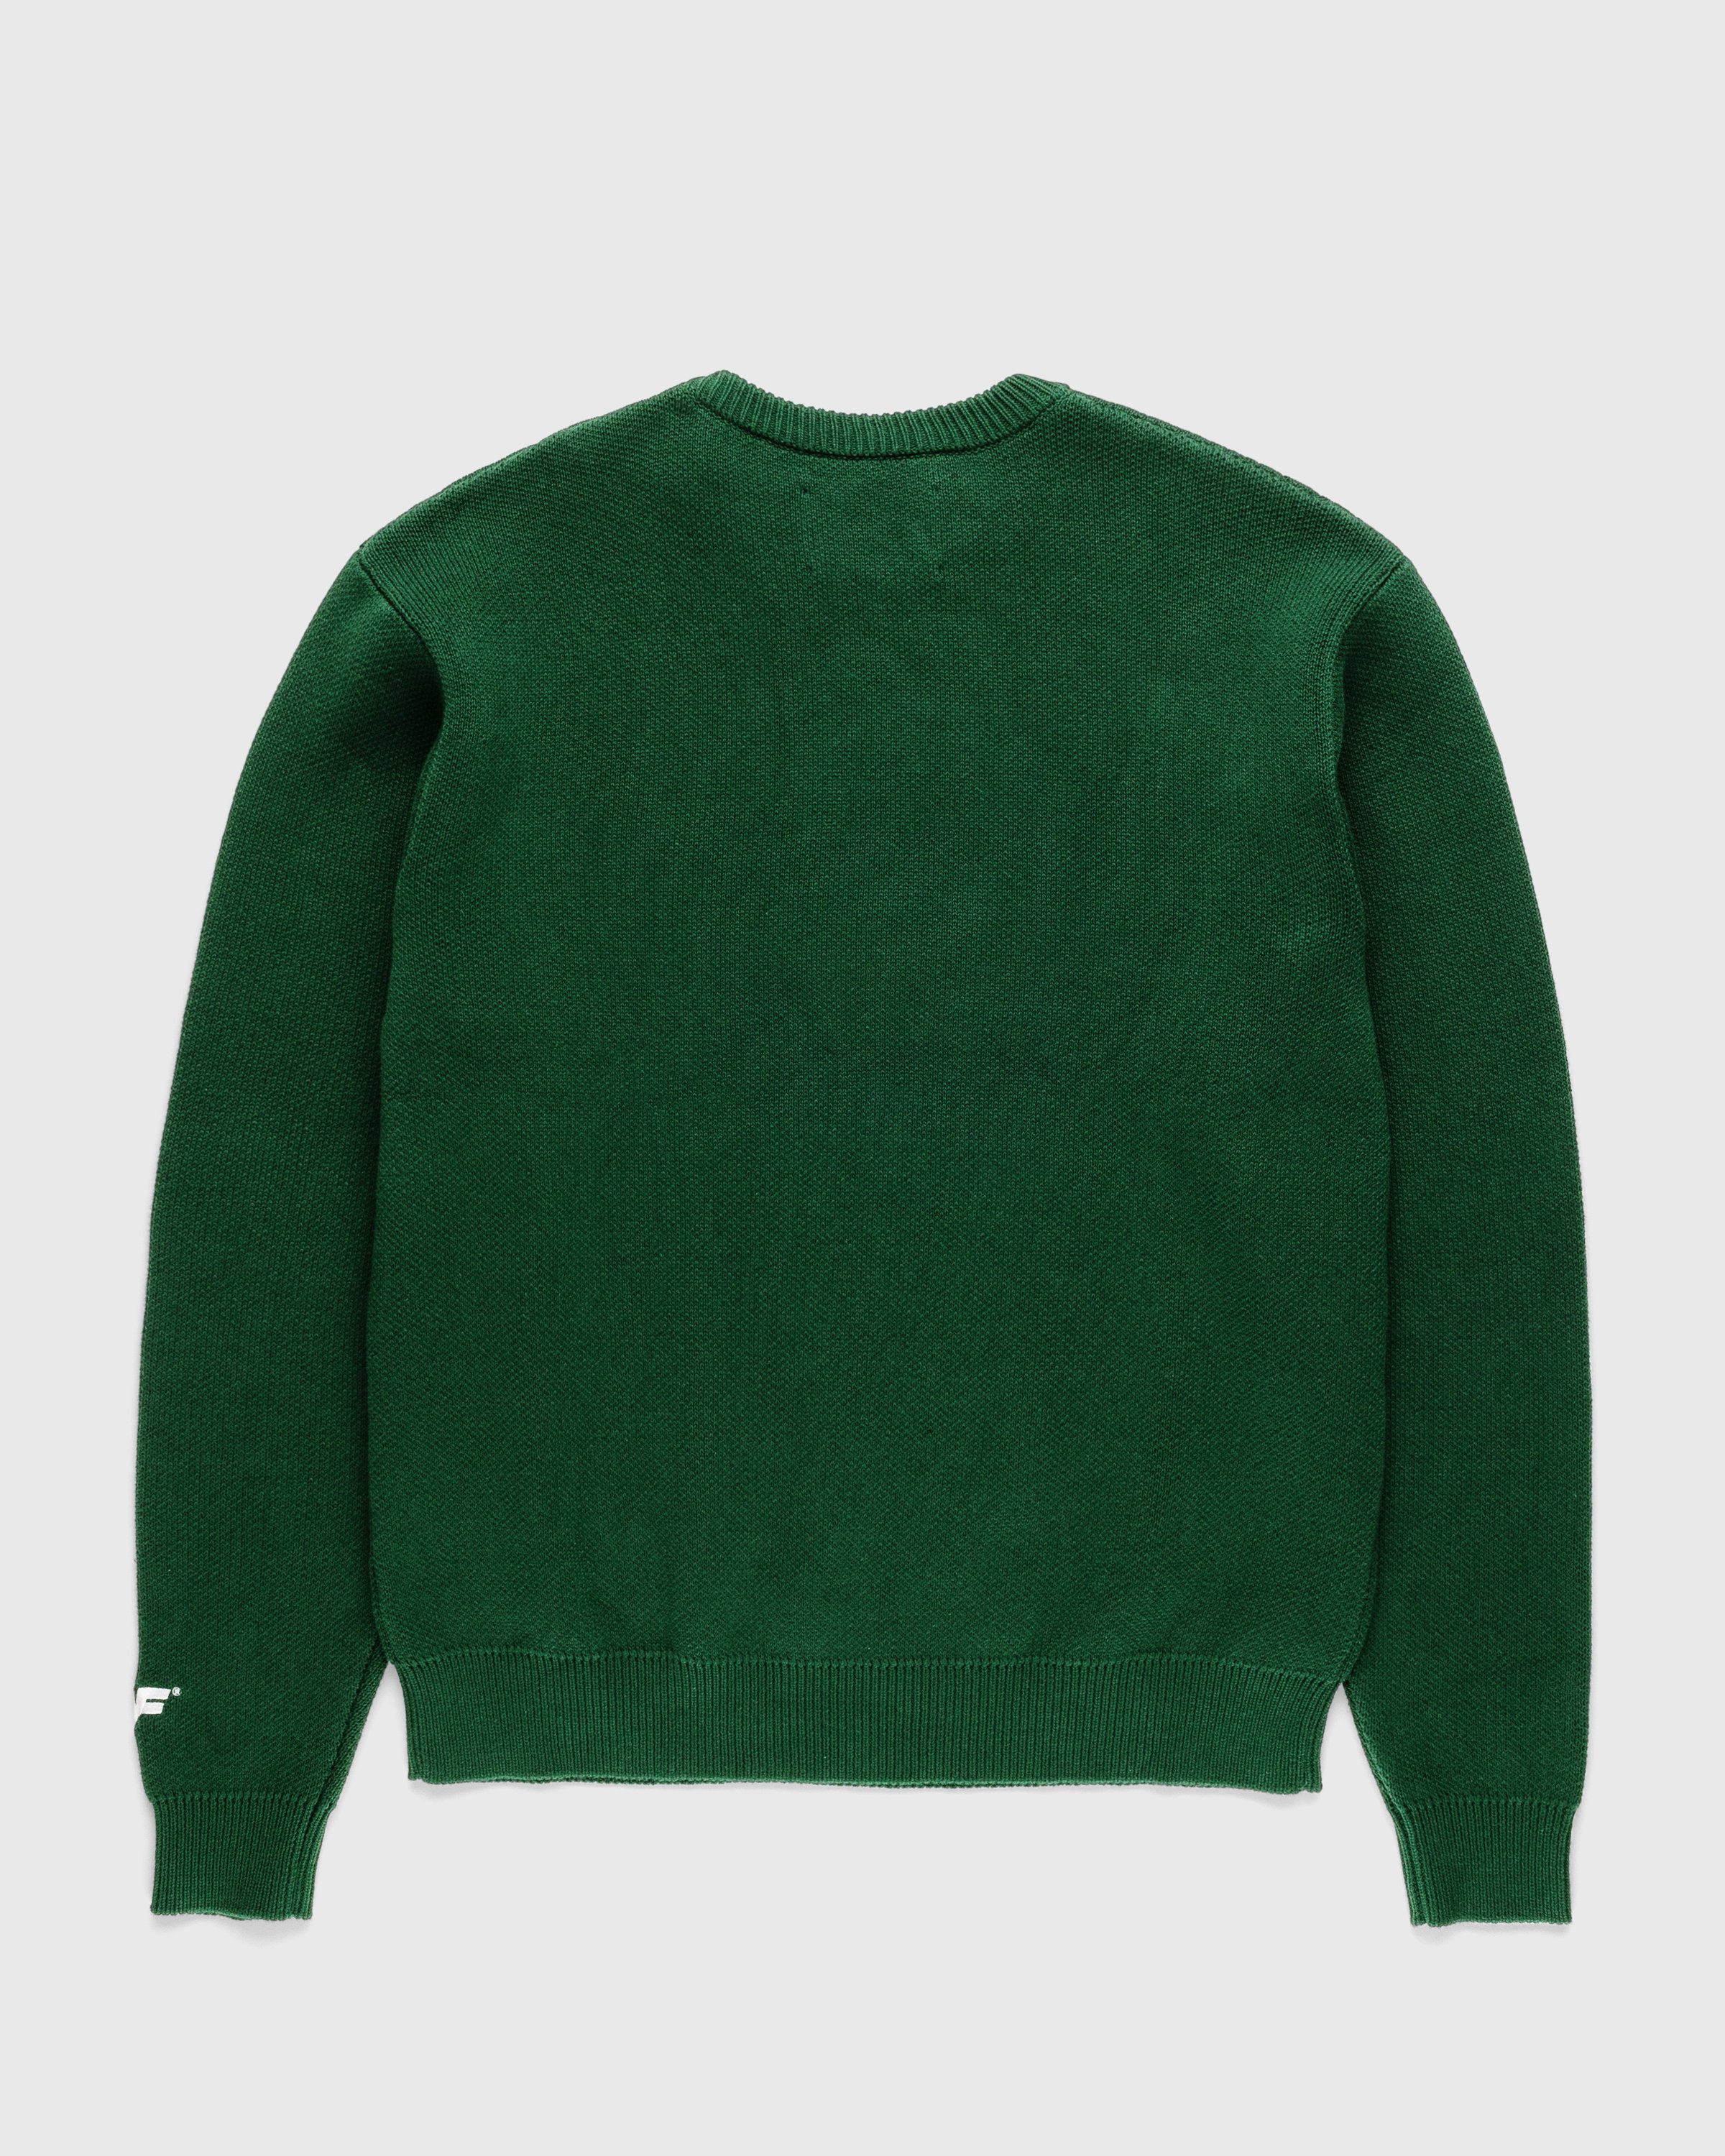 RUF x Highsnobiety - Knitted Crewneck Sweater Green - Clothing - Green - Image 2